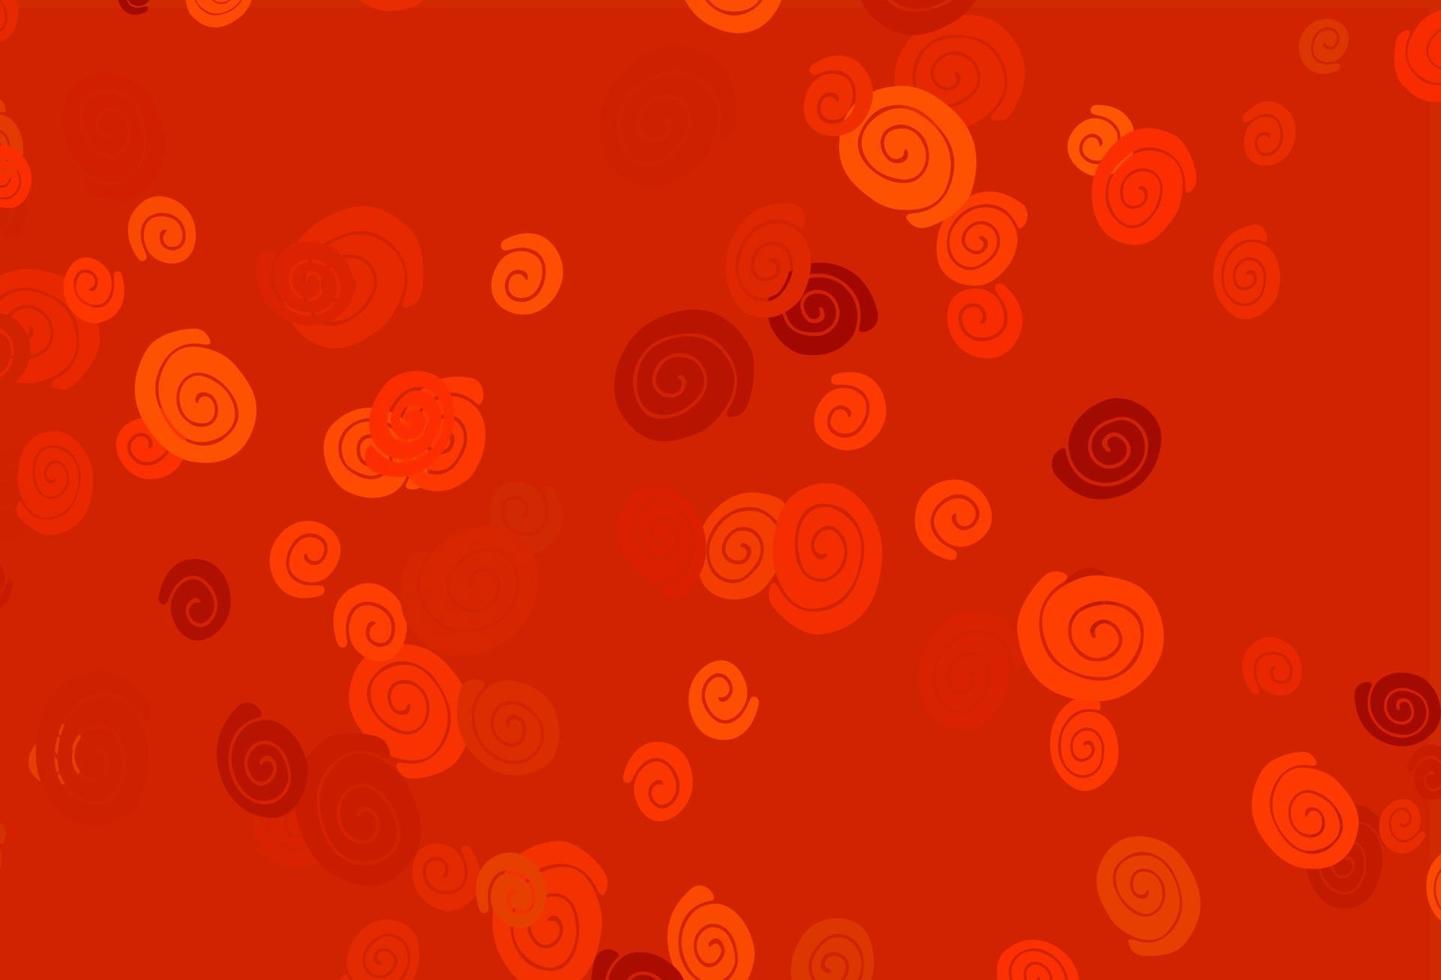 Light Orange vector background with bubble shapes.